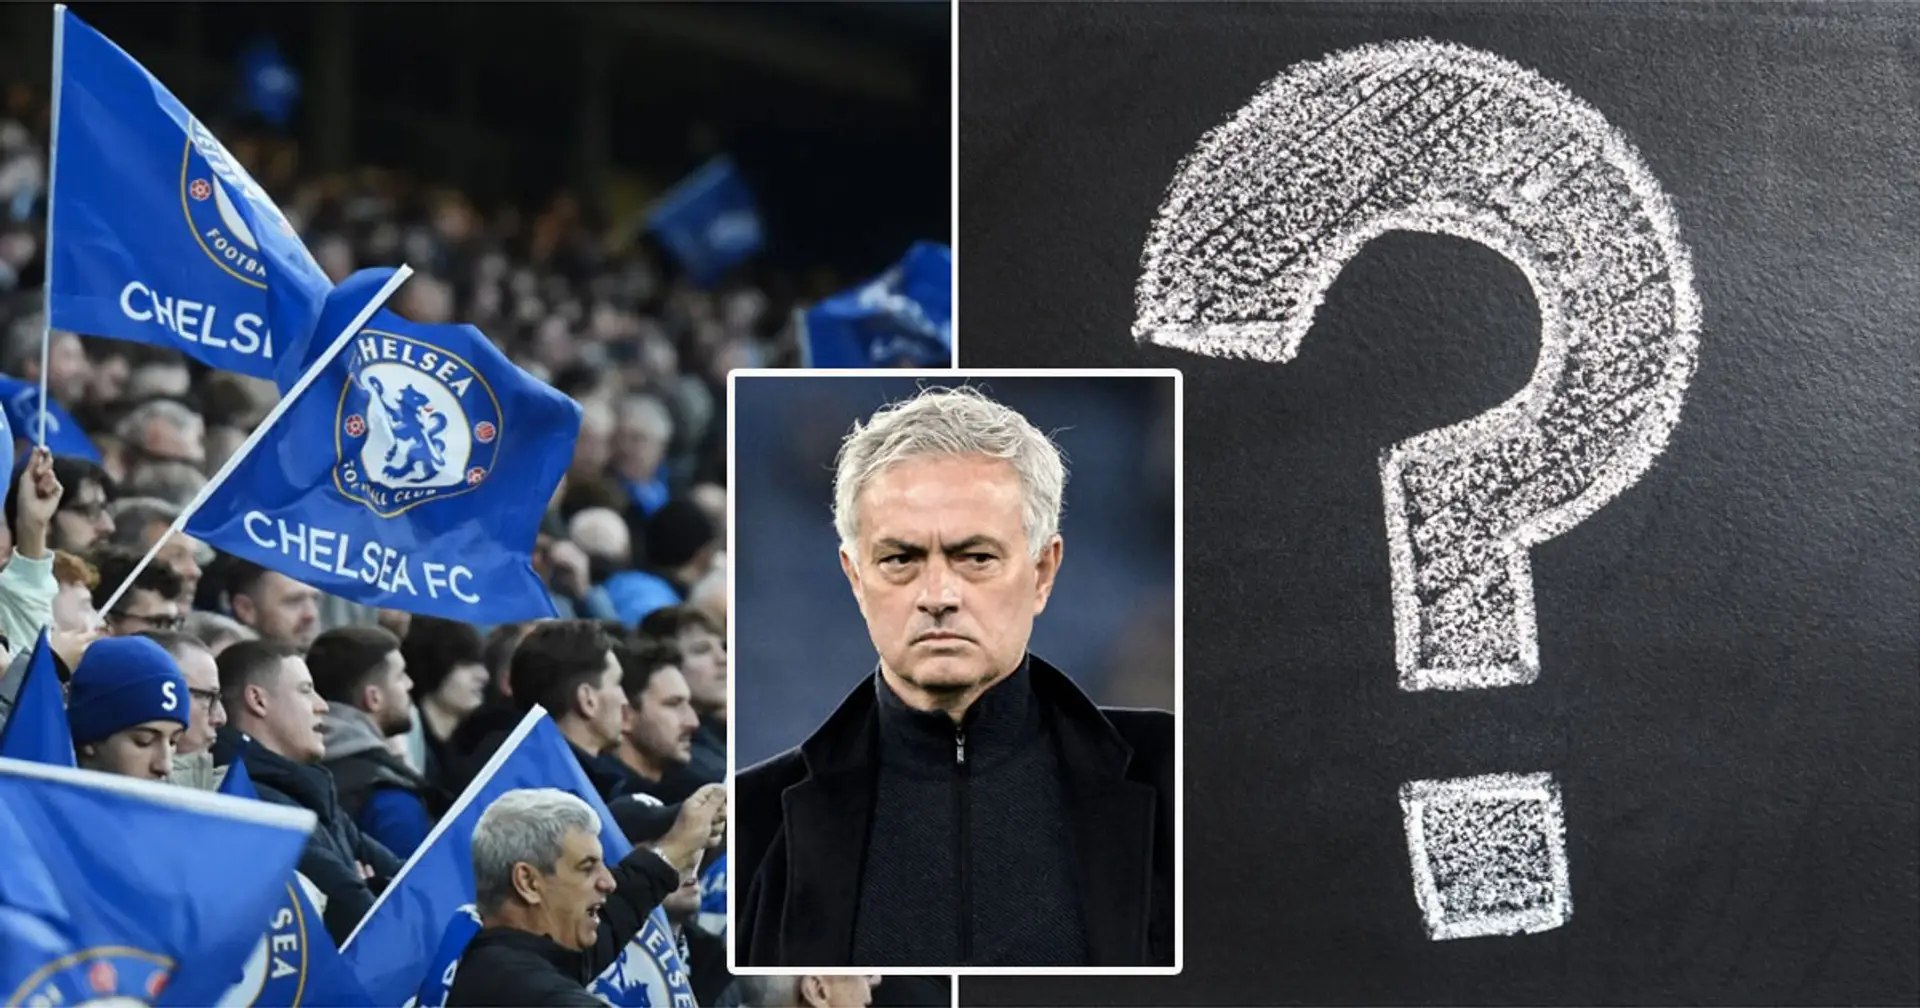 Mourinho's Chelsea return probability rated: it equals another Premier League job